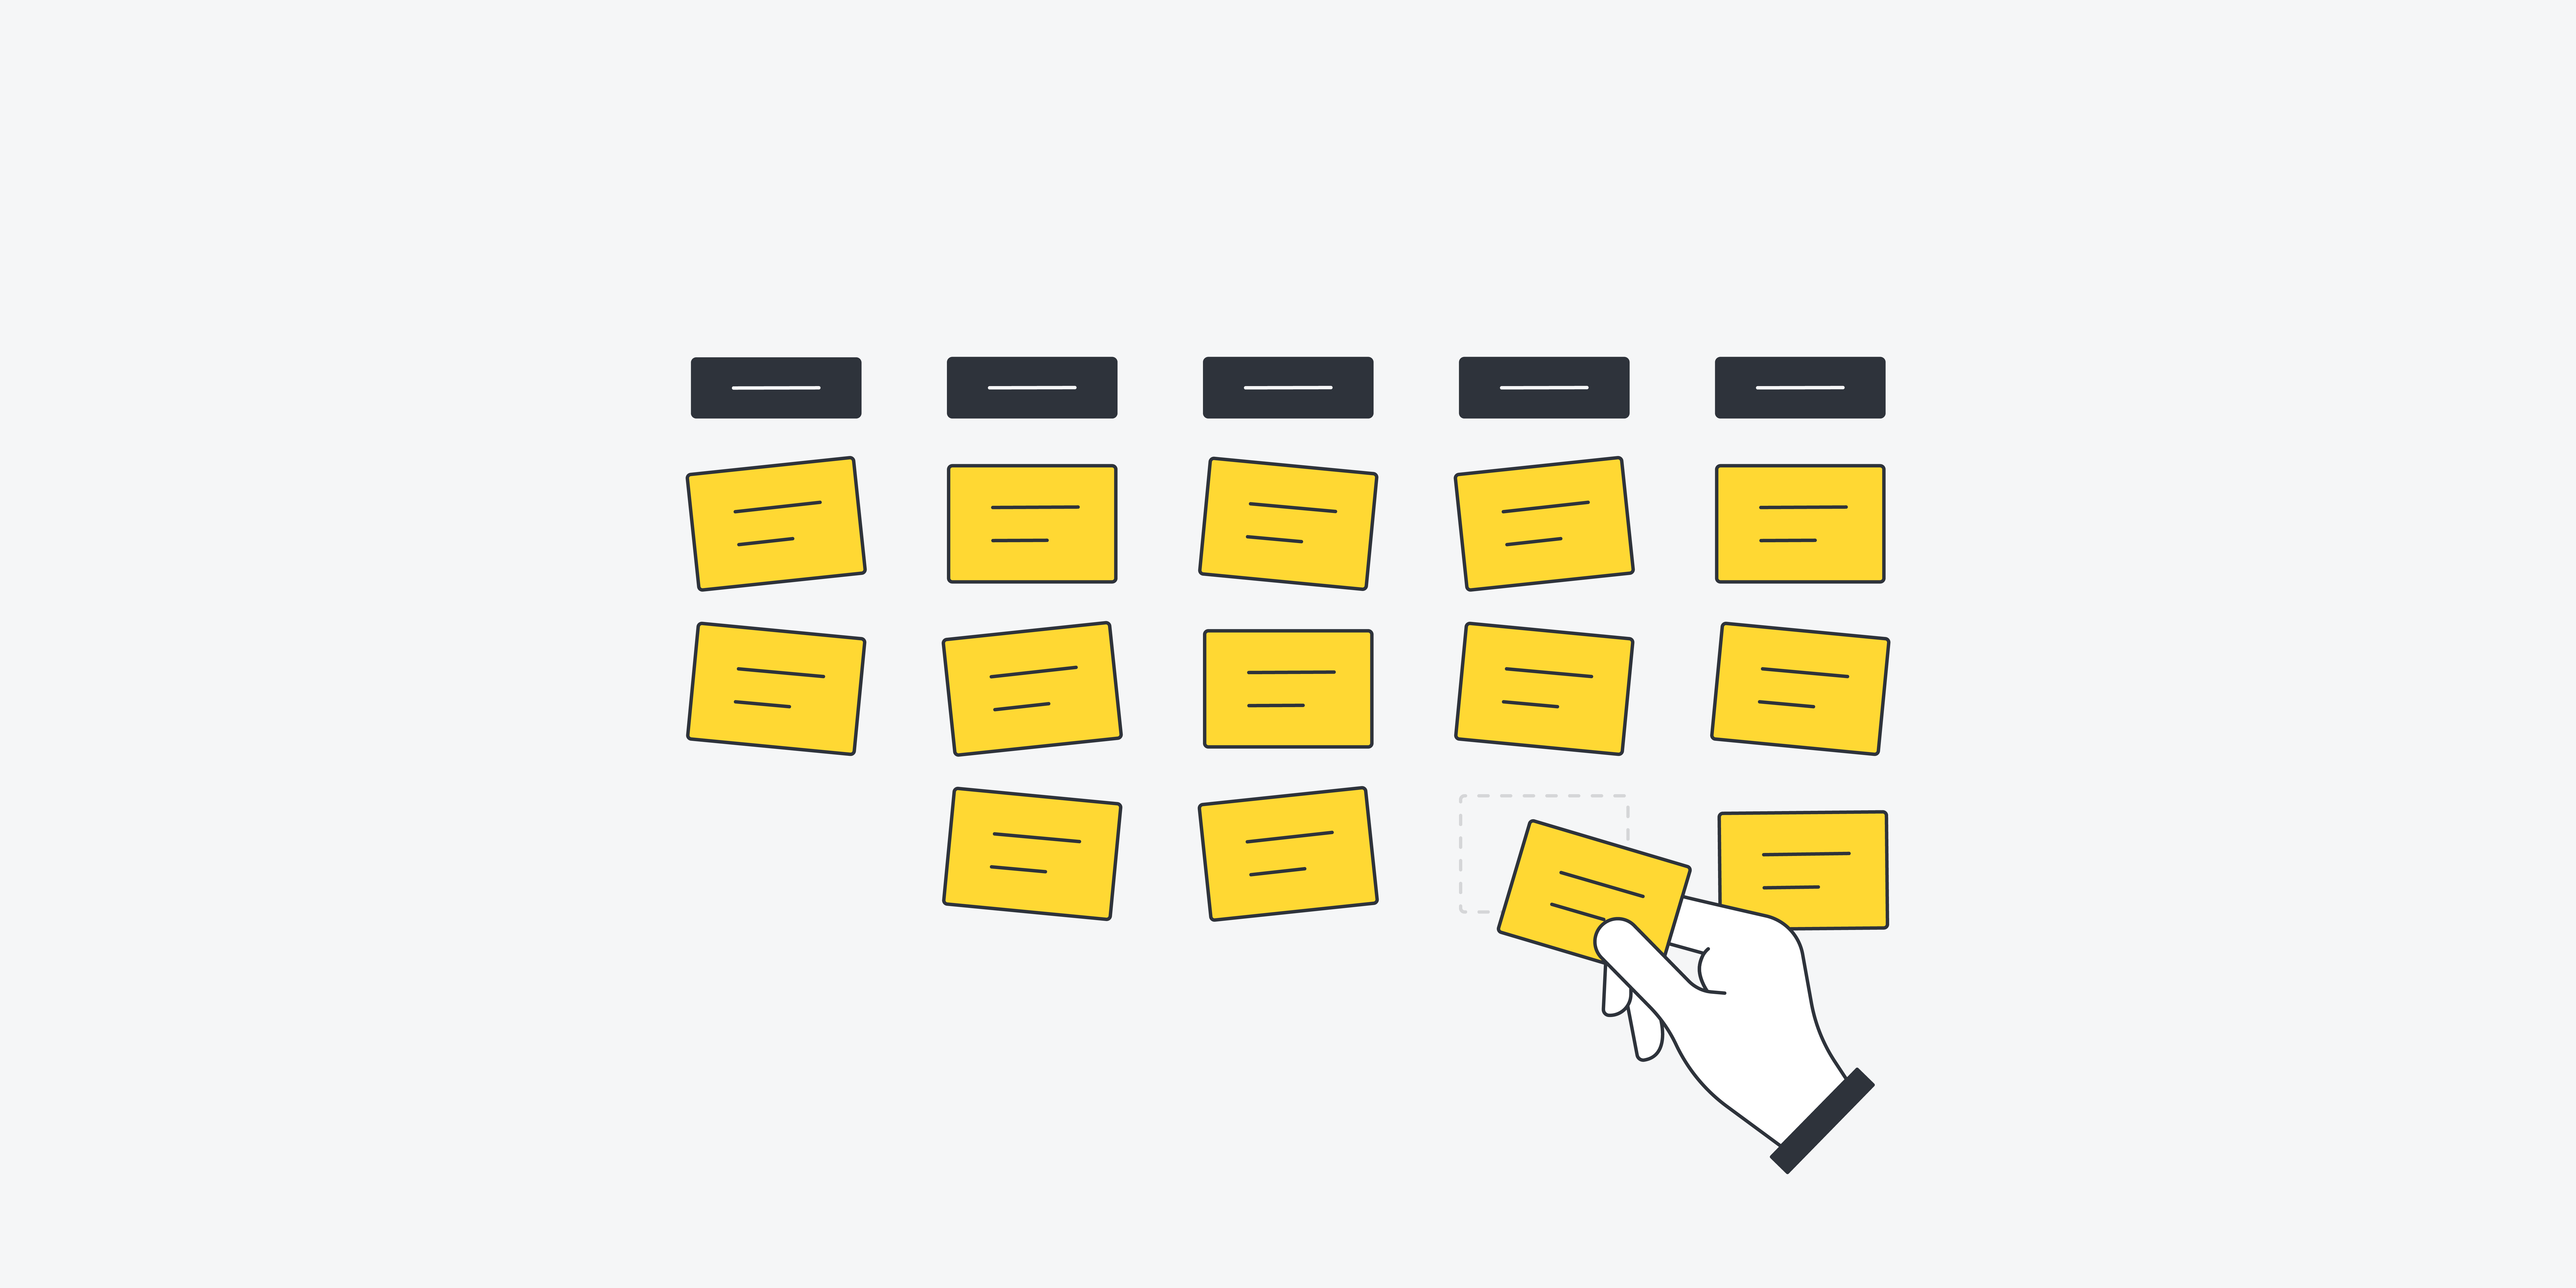 Card sorting in UX: What is it?